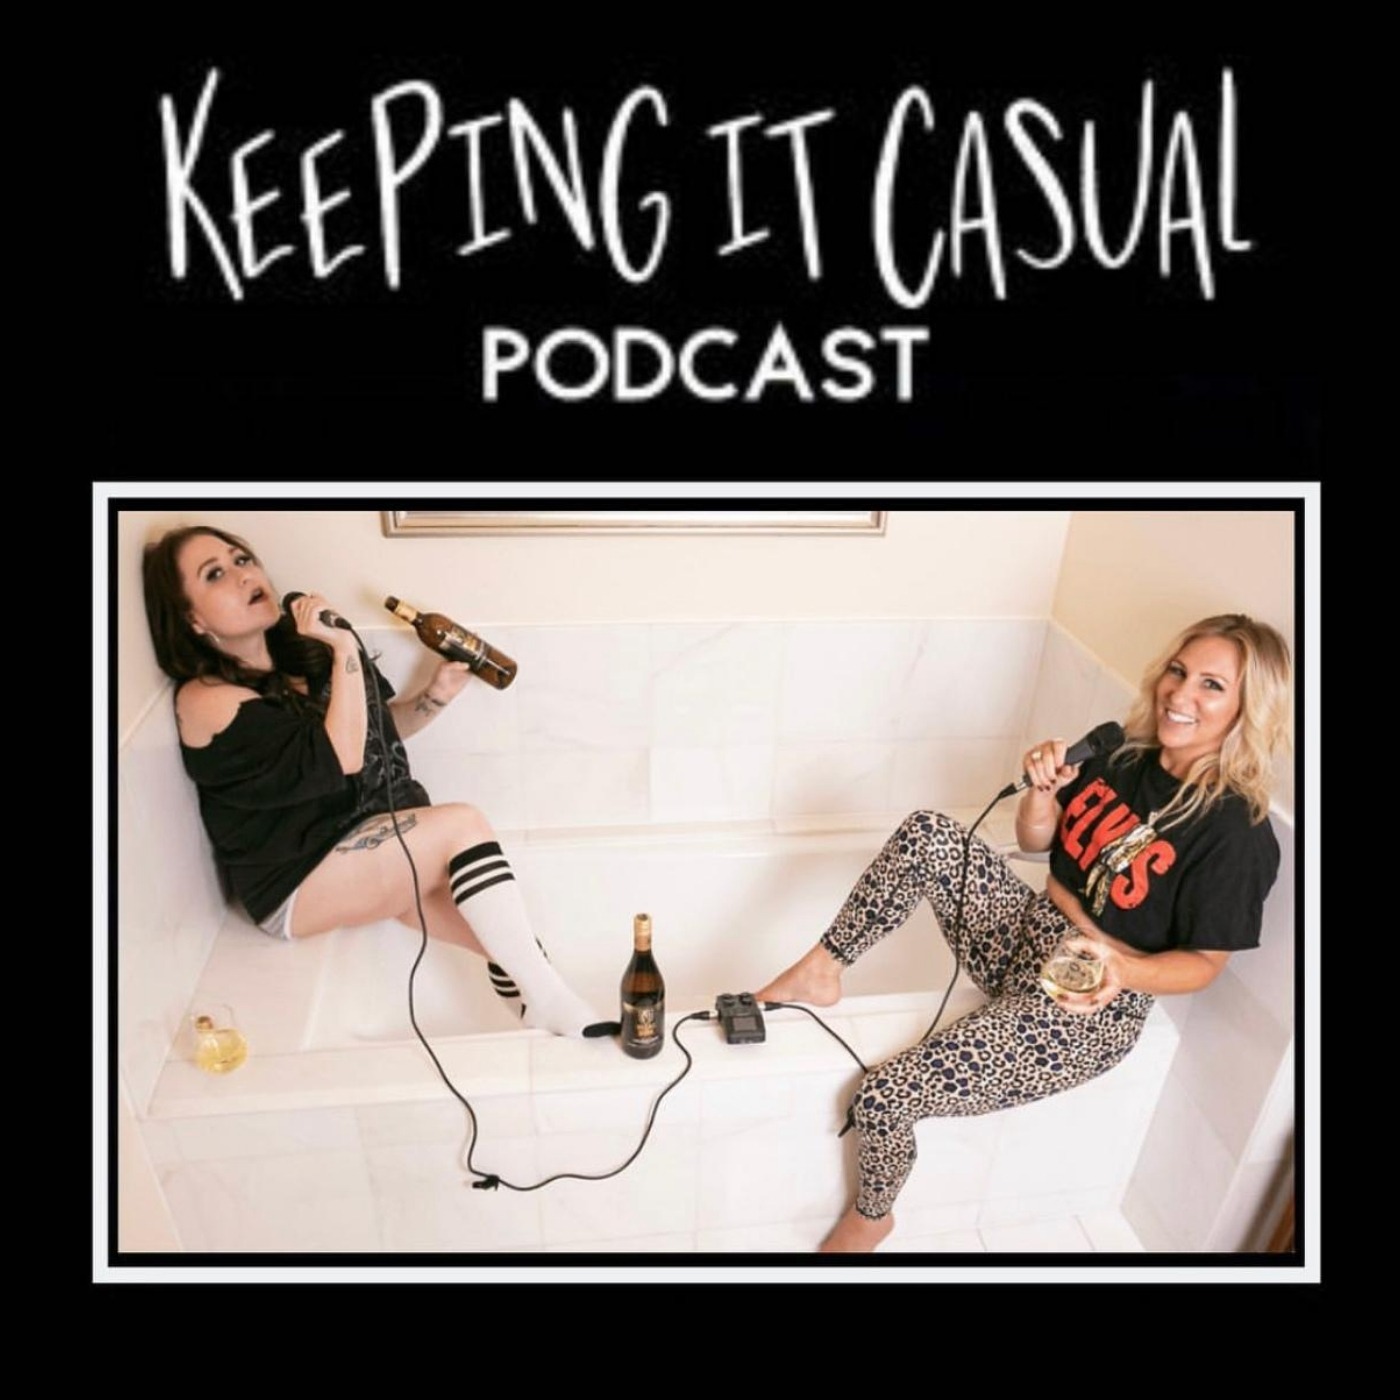 TRAILER - WHAT IS KEEPING IT CASUAL PODCAST ALL ABOUT?